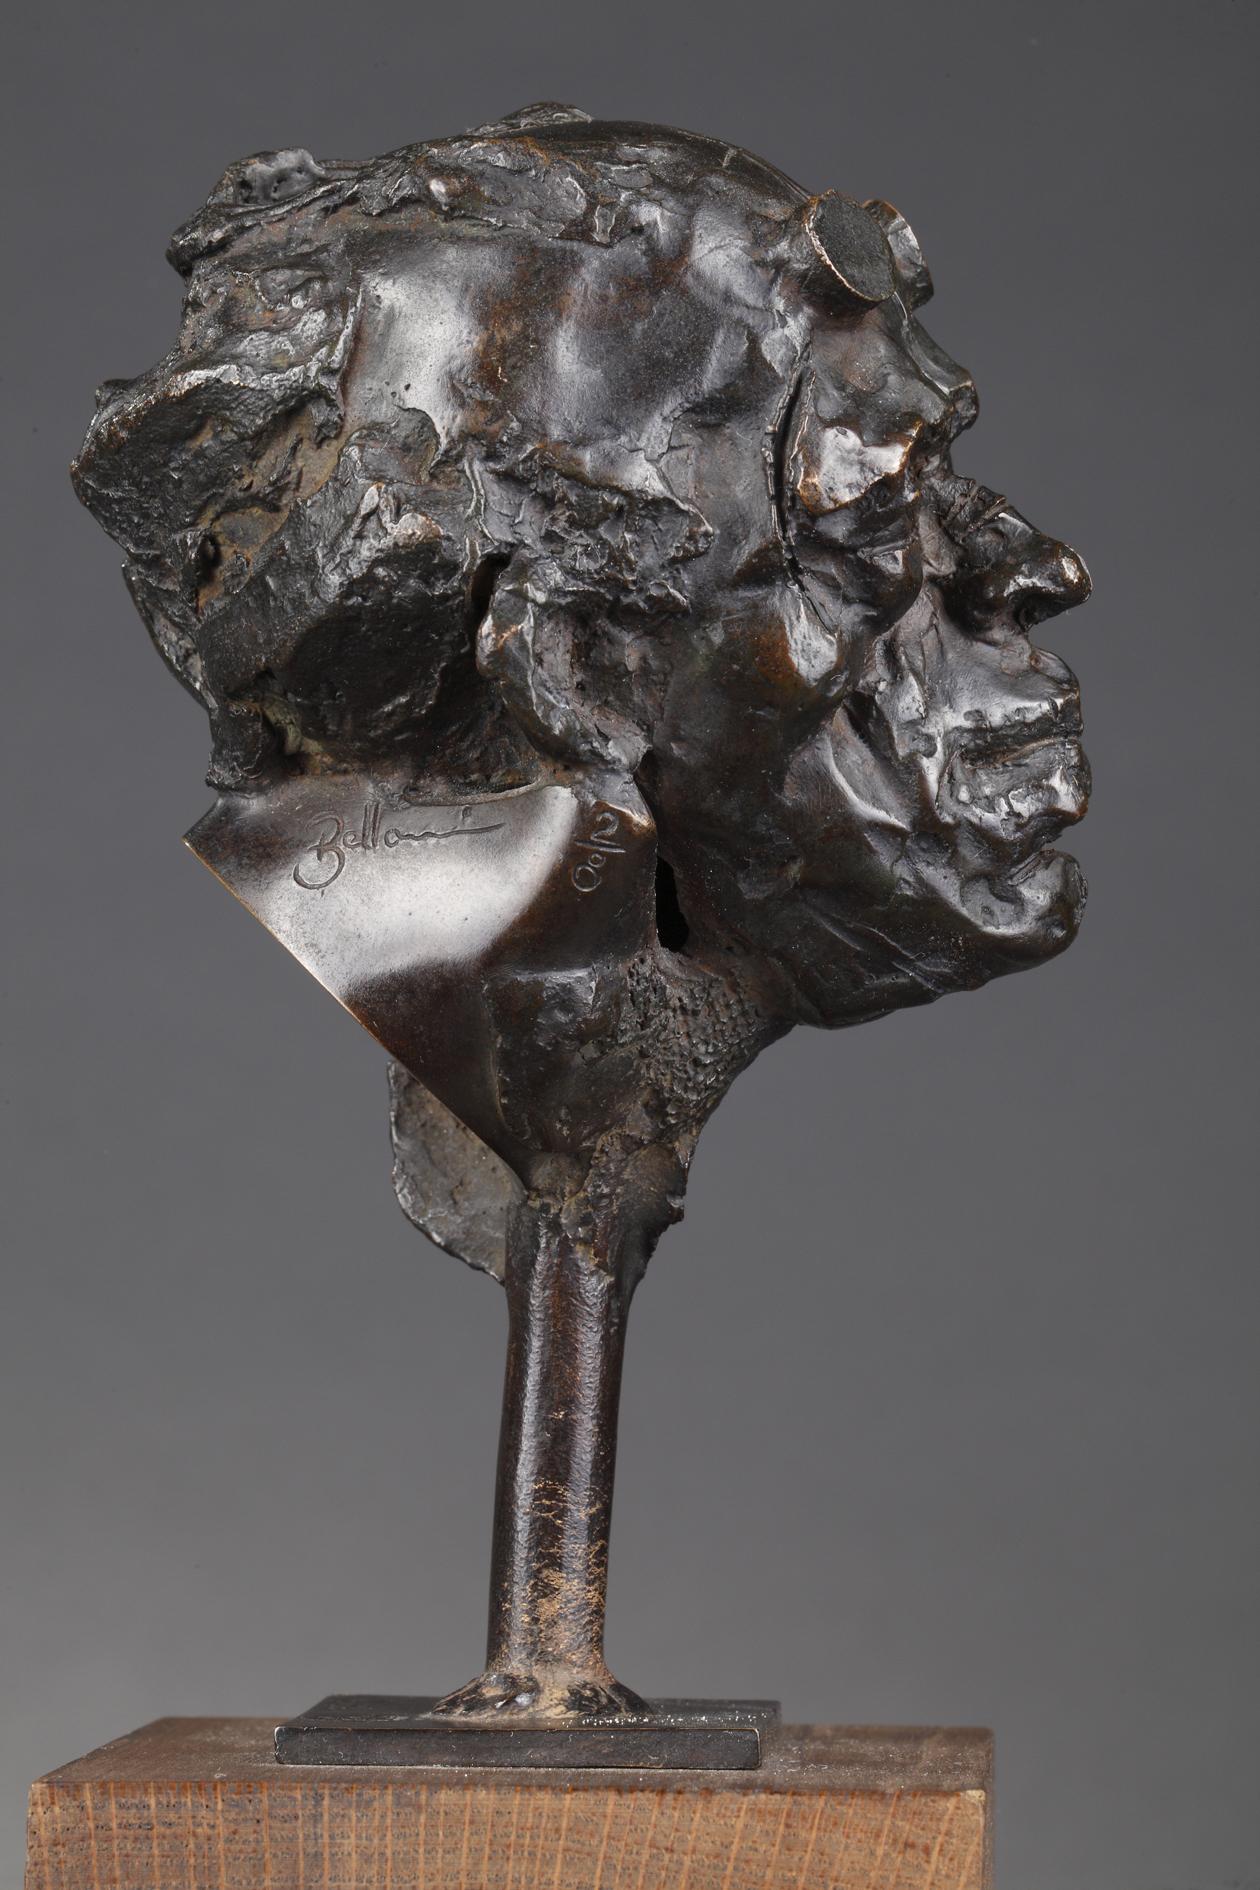 Man's head wearing glasses
by Laurent Belloni (né En 1969)
 
Bronze cast with a nuanced black patina
Signed 